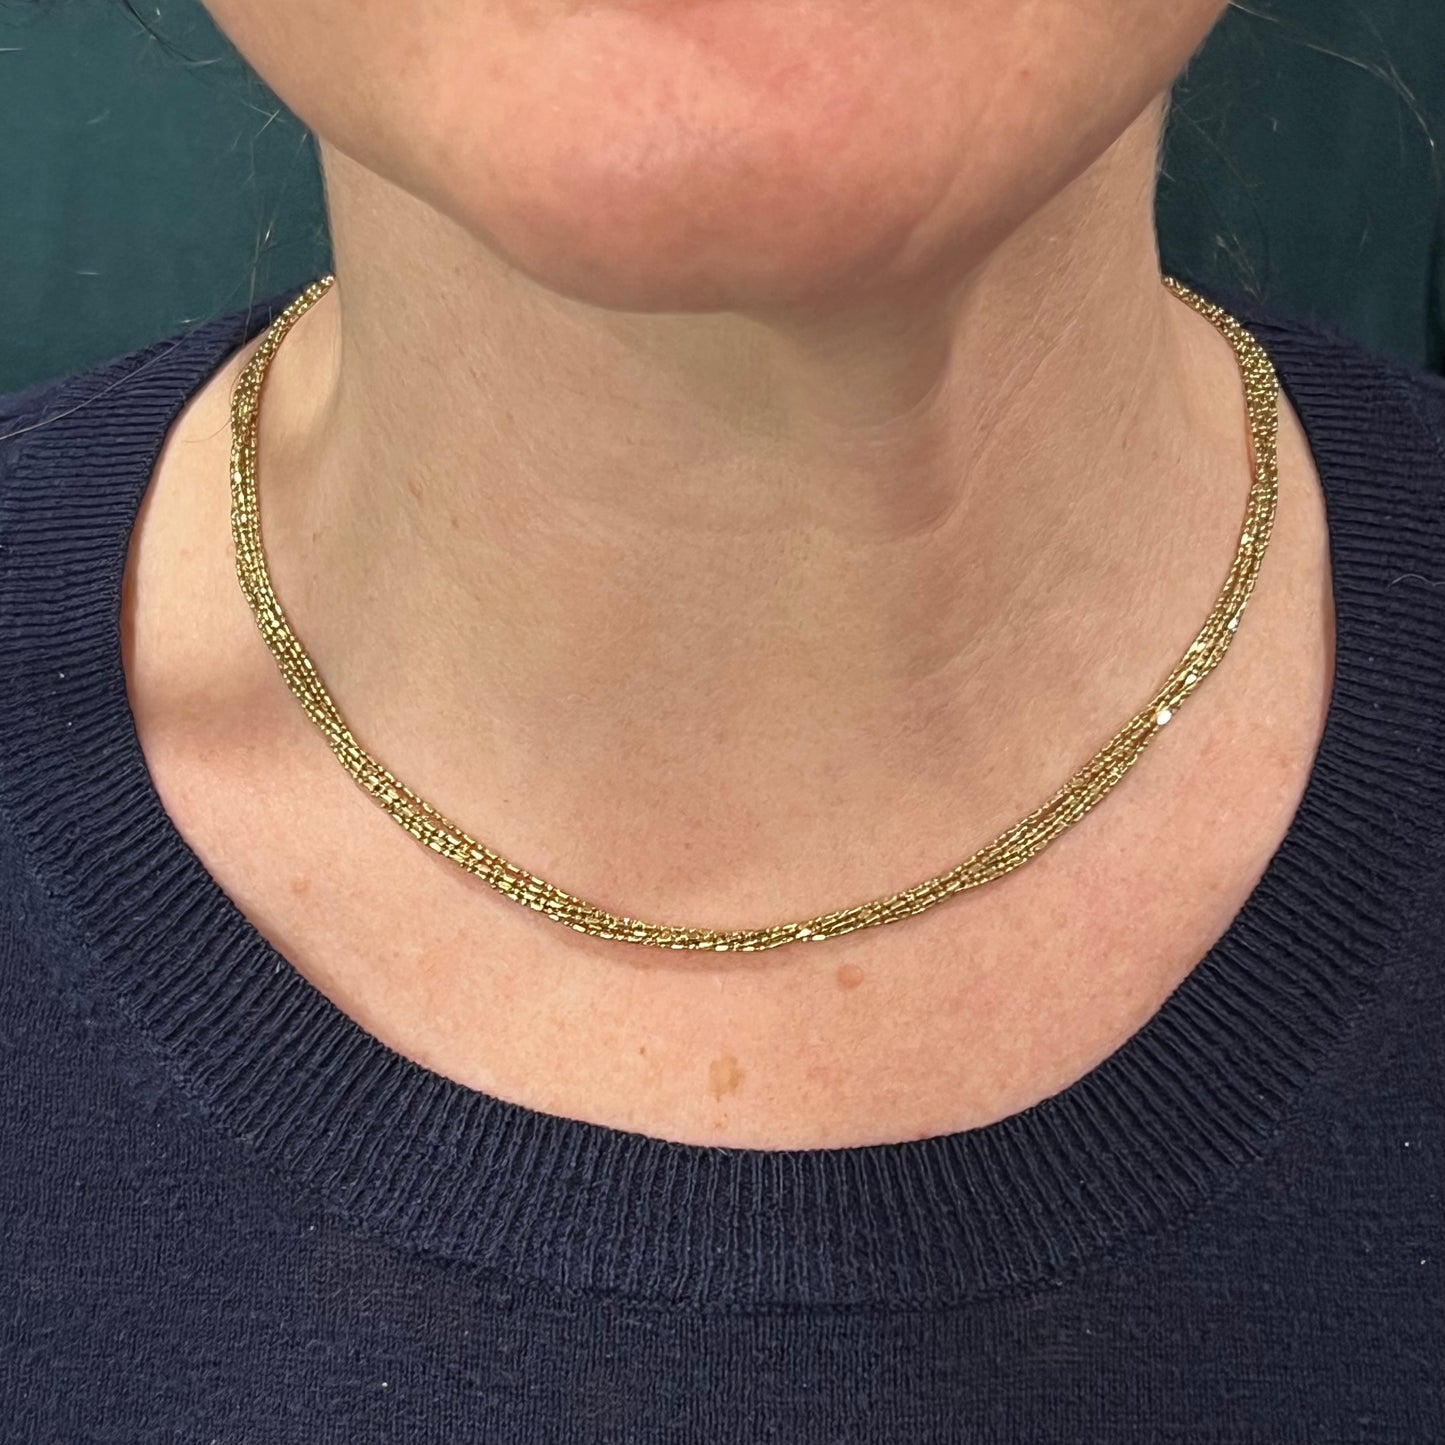 Multi-Strand Chain Necklace in 14k Yellow Gold